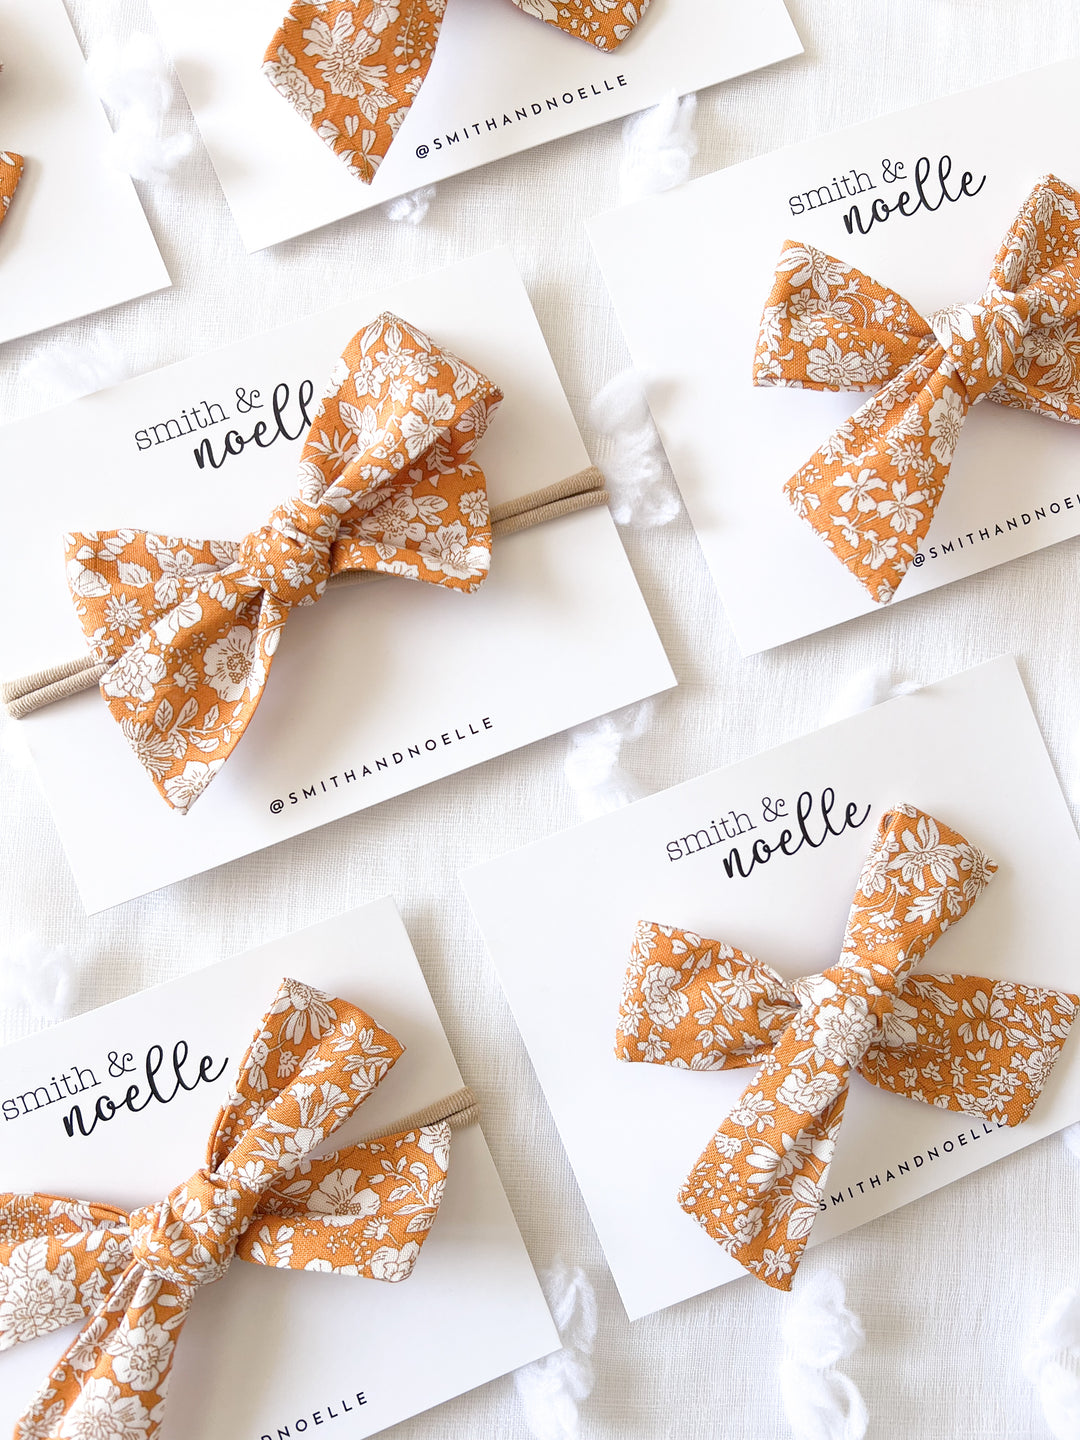 smith & noelle, Hand Tied Bows, Cheddar Floral